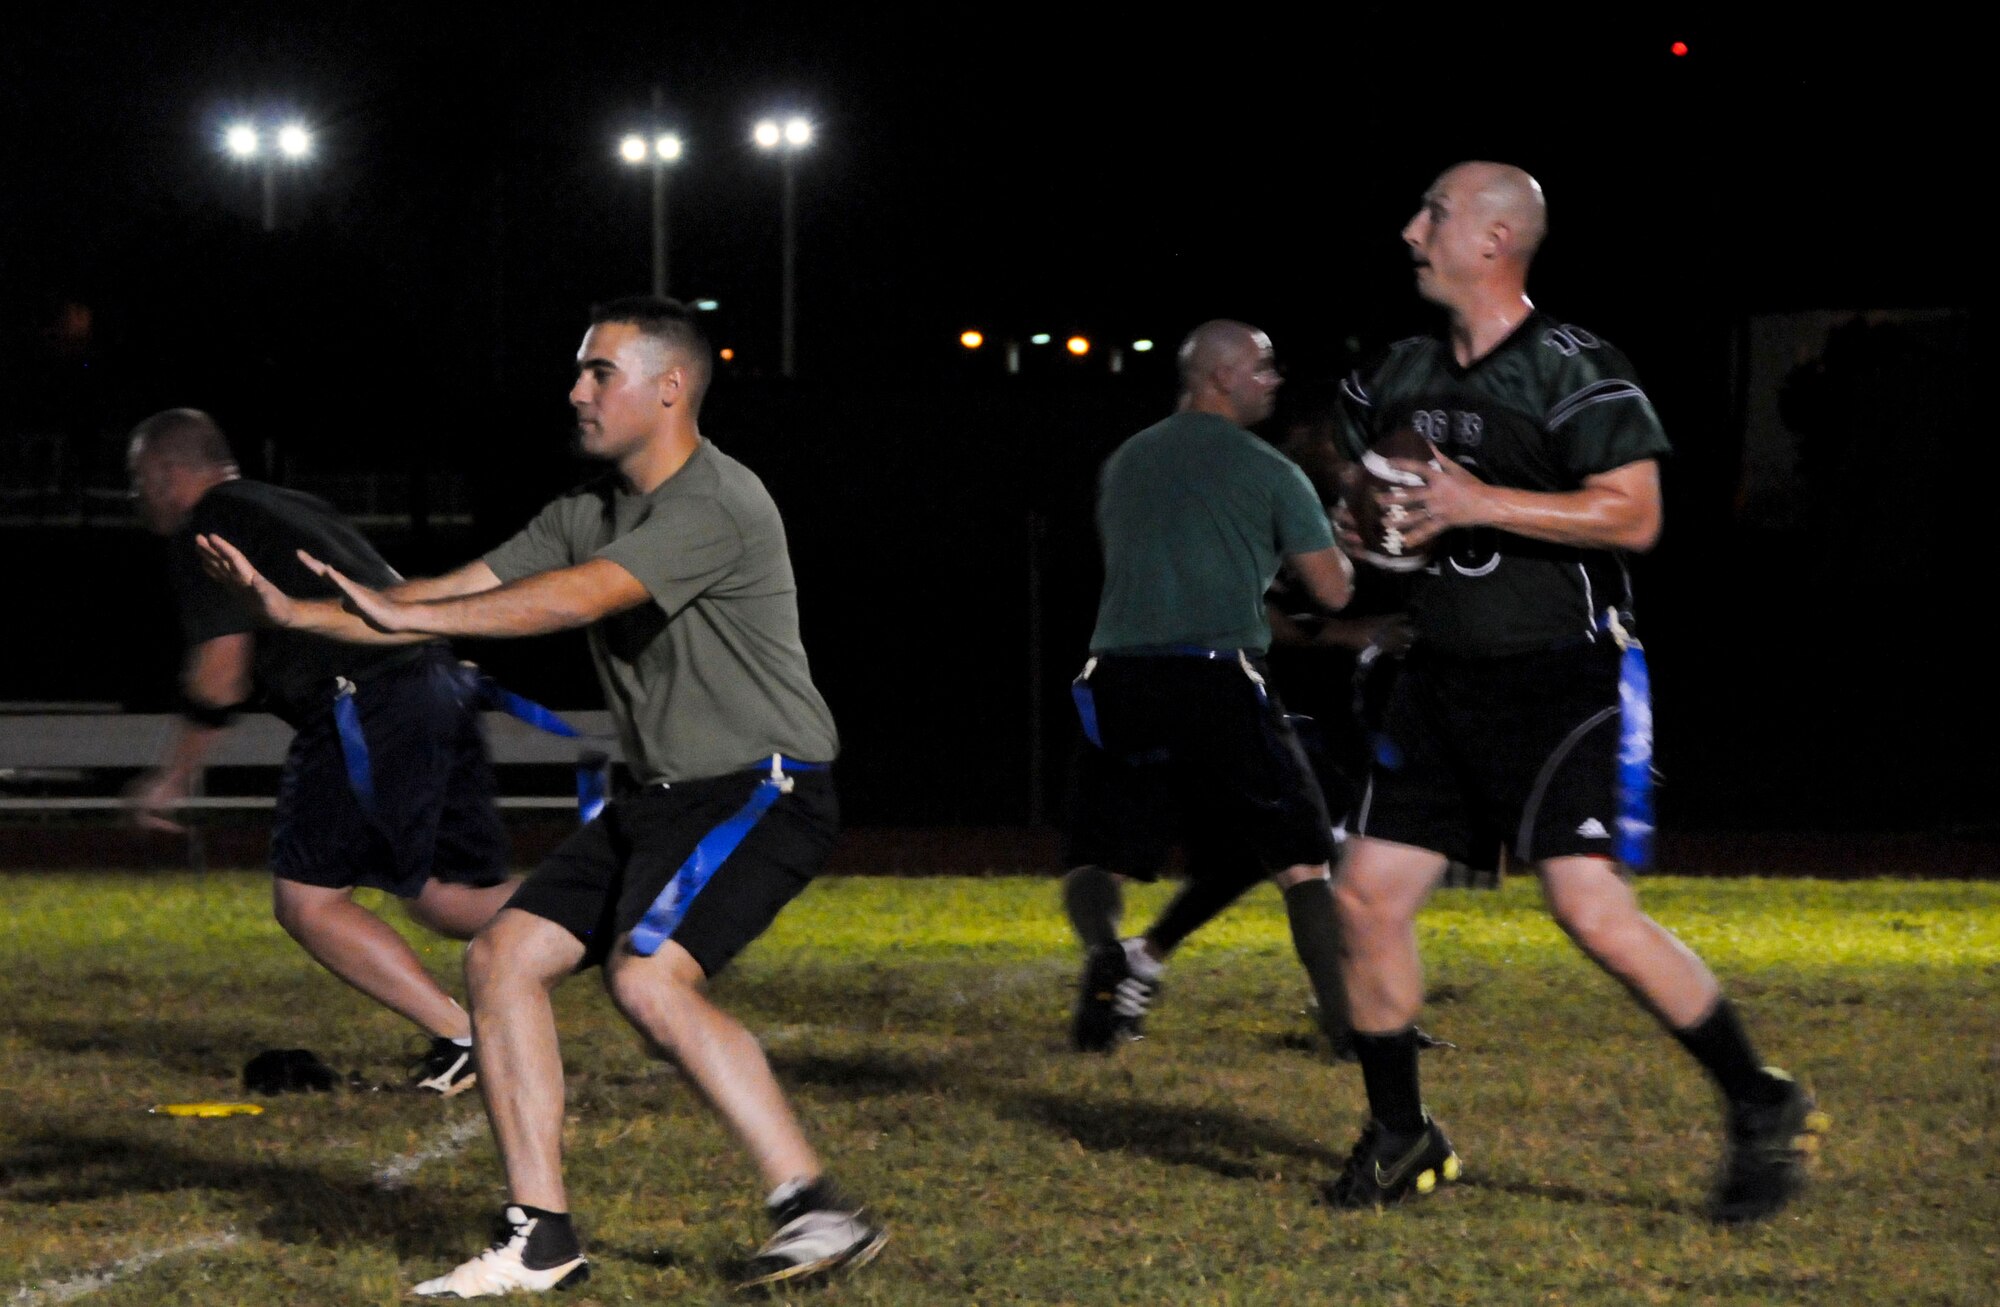 A member from the 36th Civil Engineer Squadron prepares to pass the ball to a teammate during an intramural football game against the 94th Army Air and Missile Defense Command Nov. 6, 2013, on Andersen Air Force Base, Guam. The 36th CES defeated the 94th AAMDC 18-14. (U.S. Air Force photo by Airman 1st Class Amanda Morris/Released)